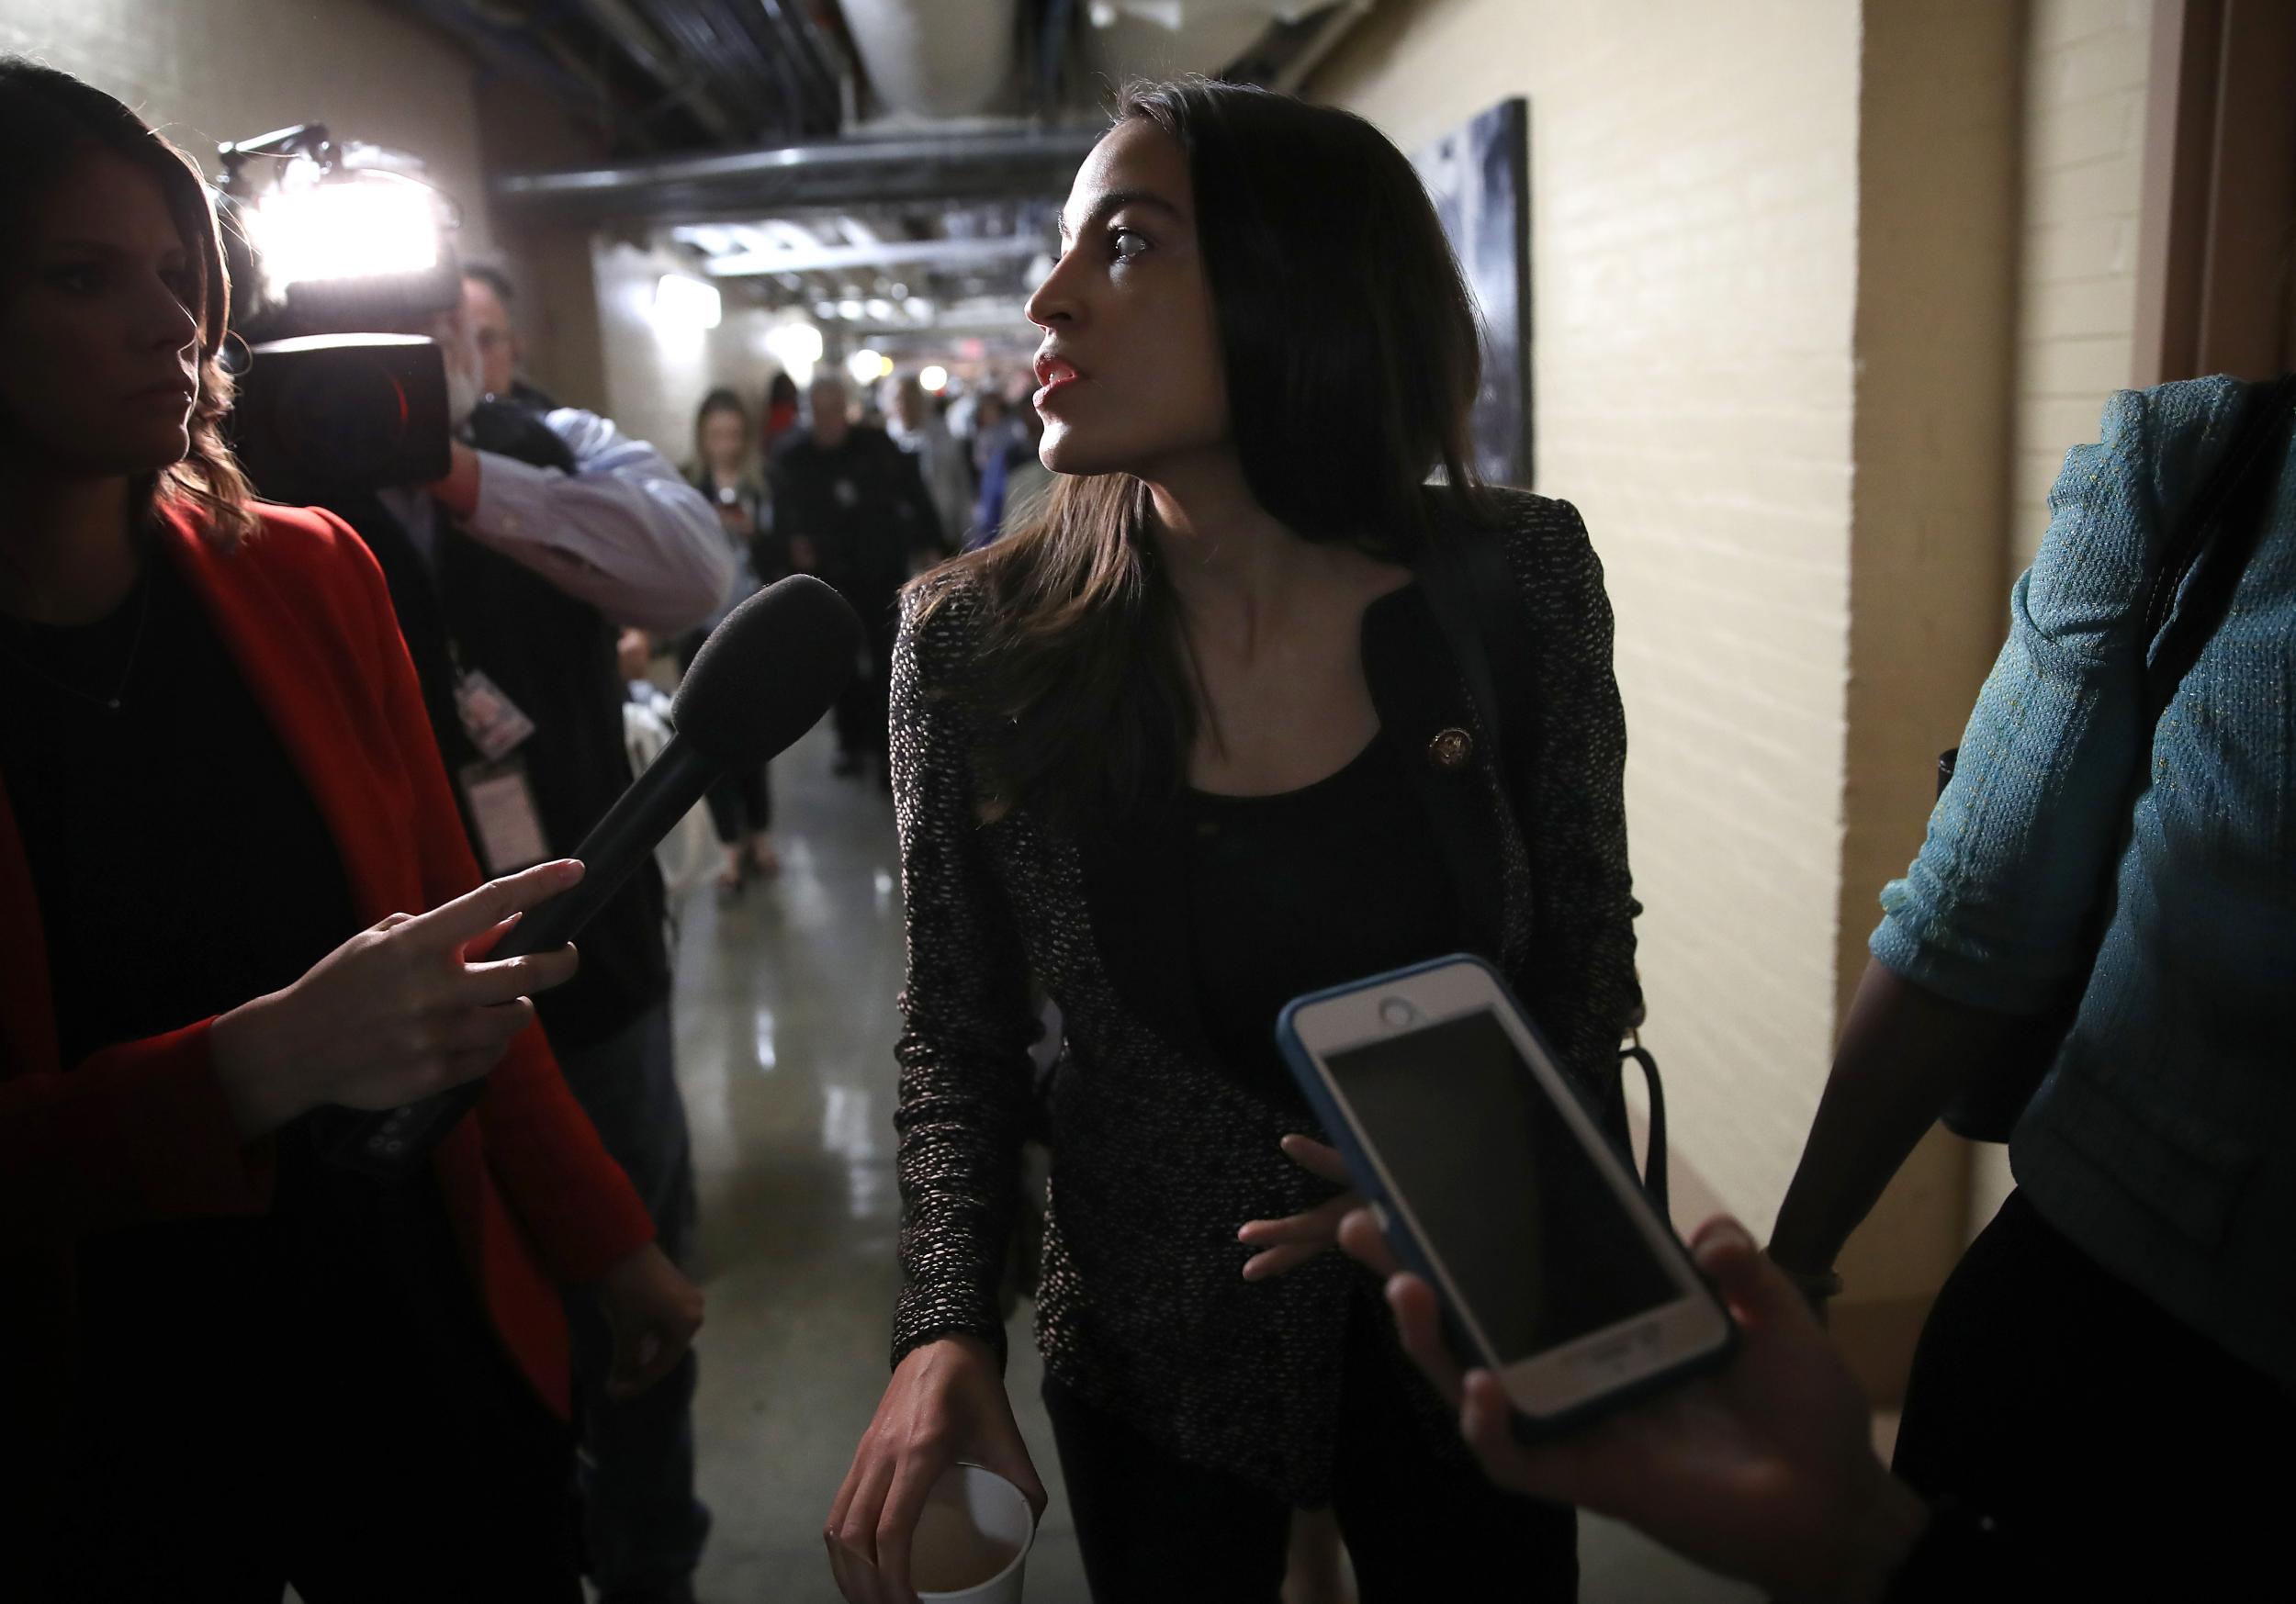 AOC to be sued after court rules Trump can't block people on Twitter